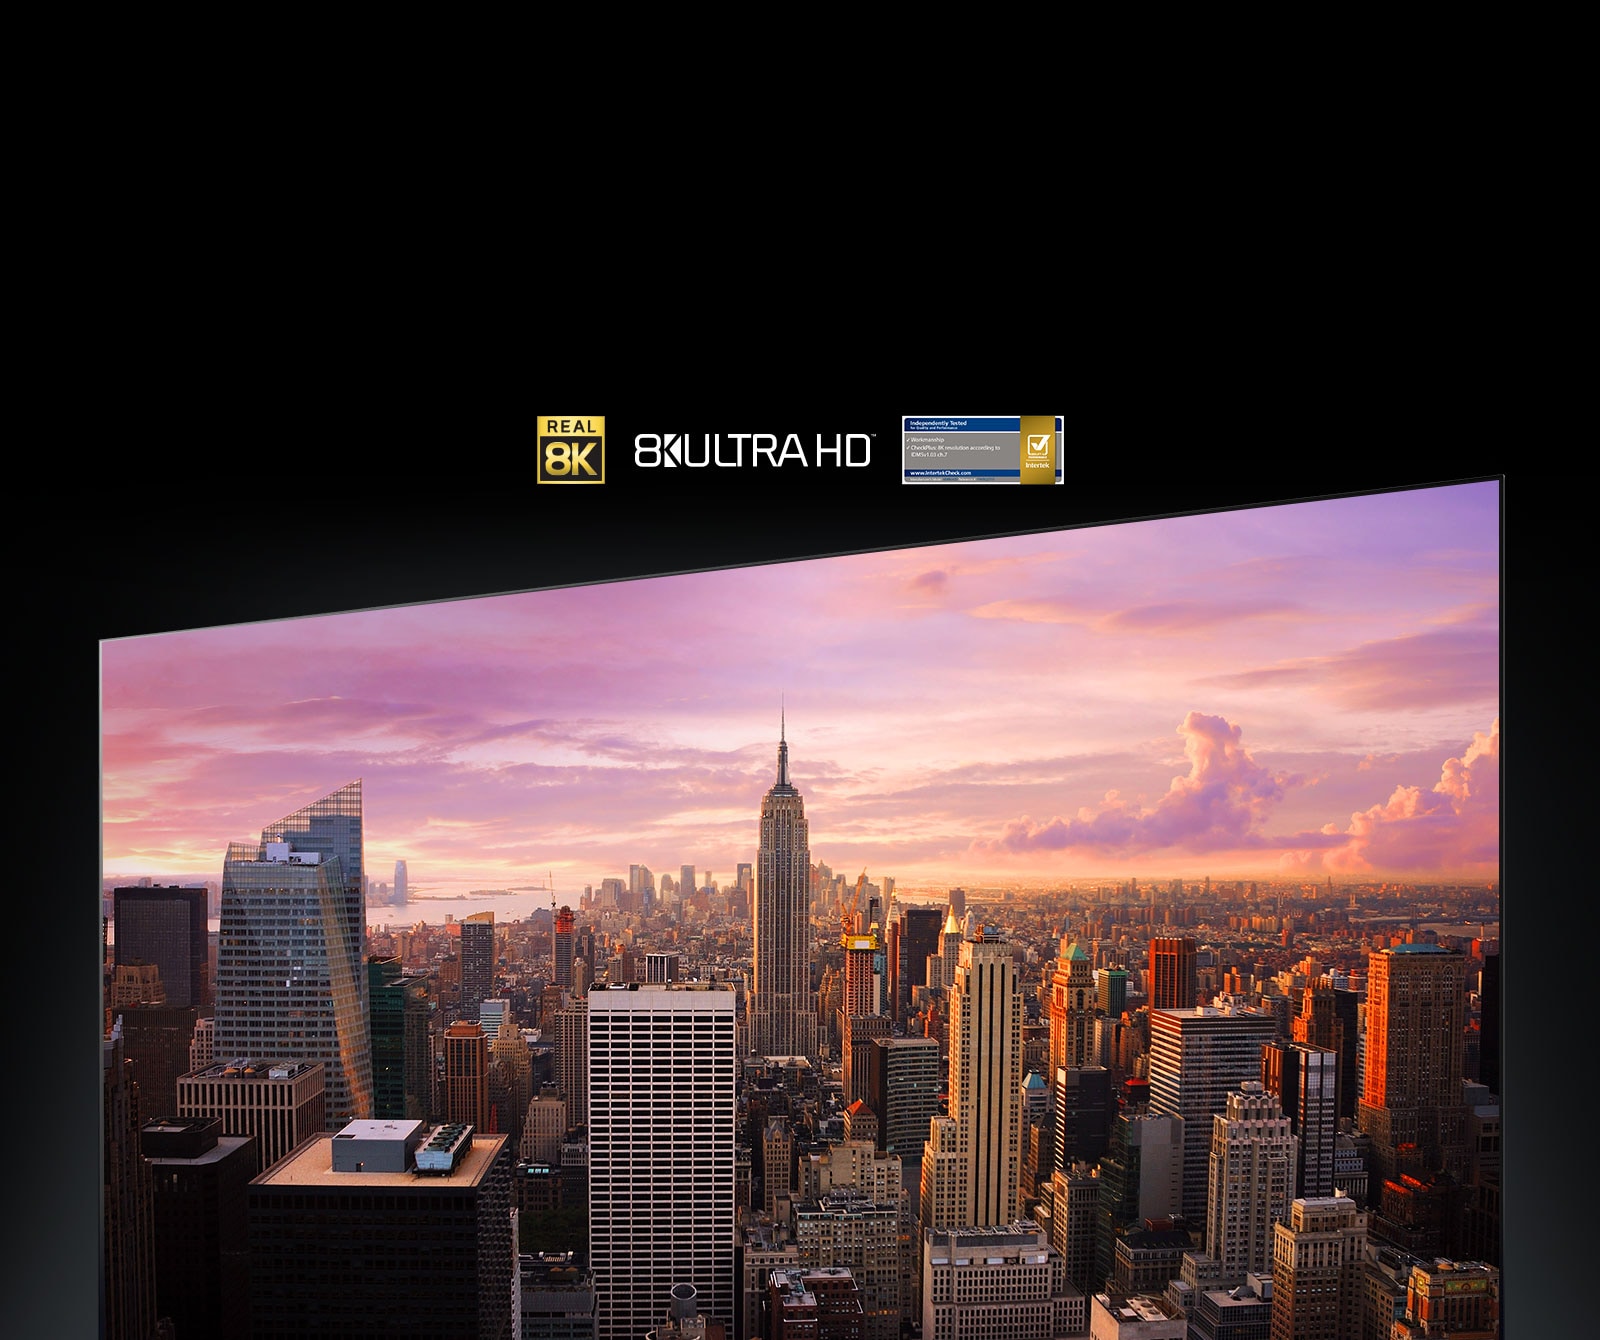 A panoramic view of New York City on the TV screen